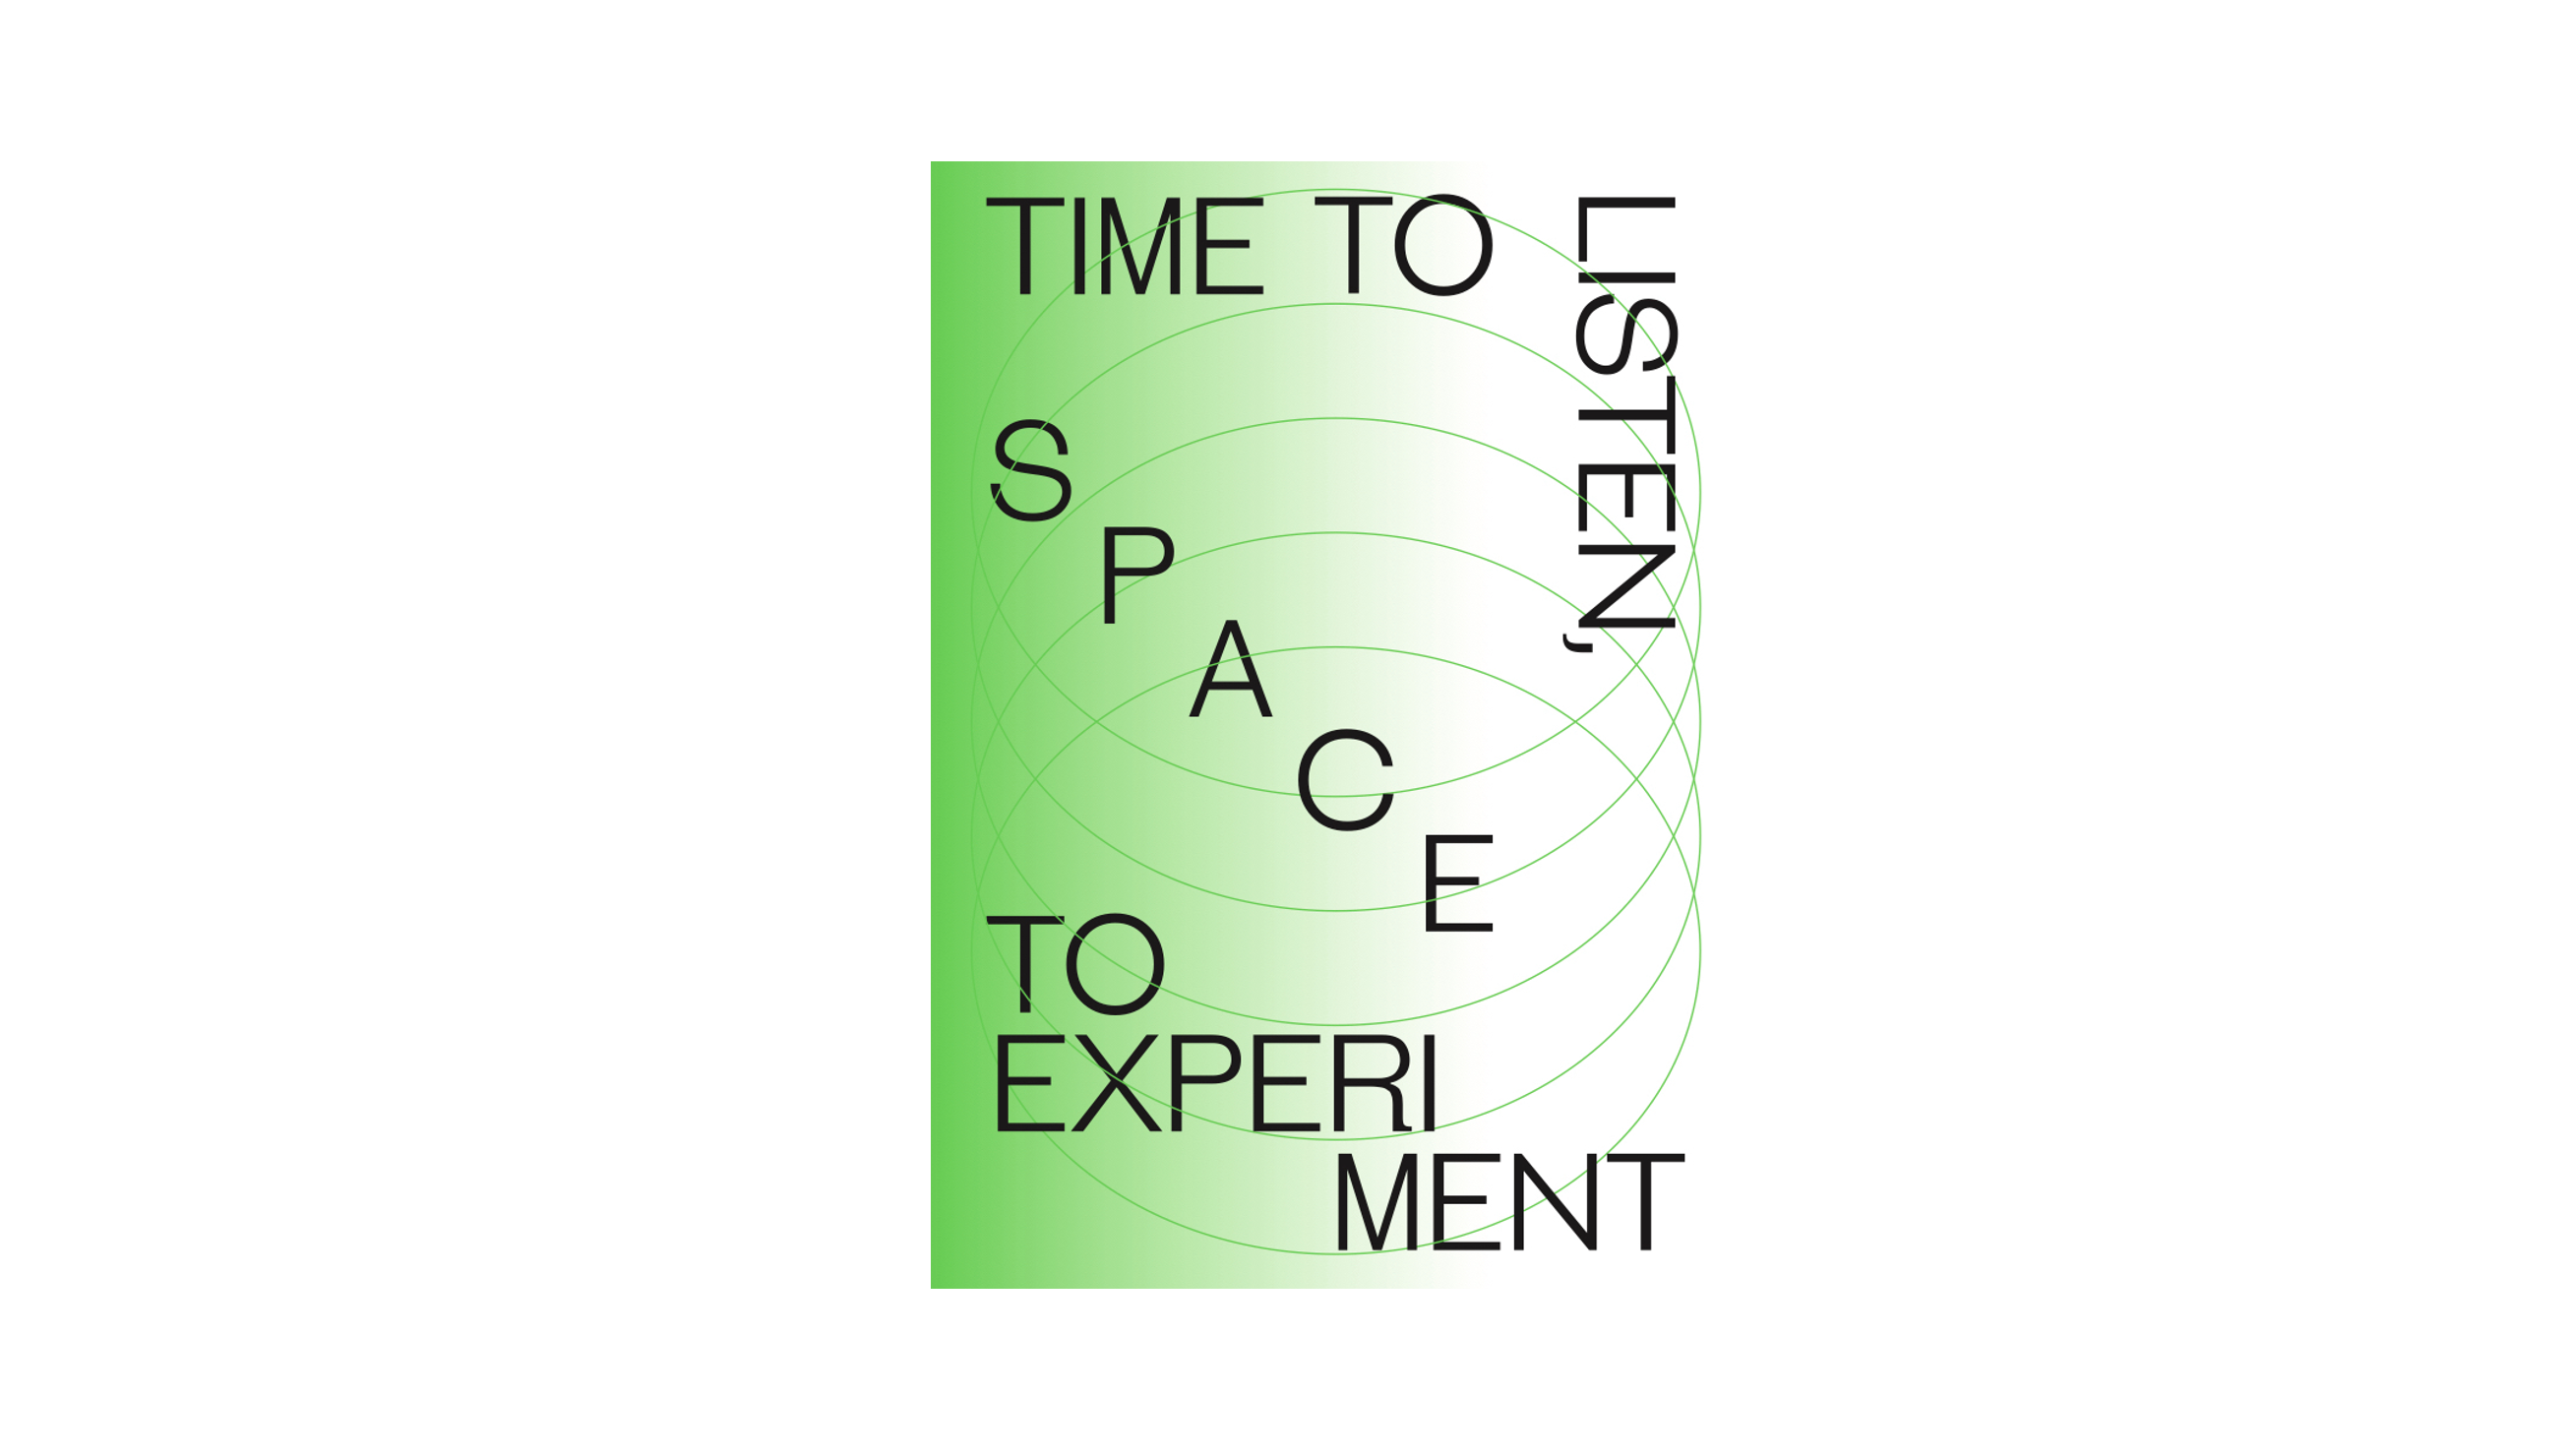 Publication: Time To Listen, Space To Experiment